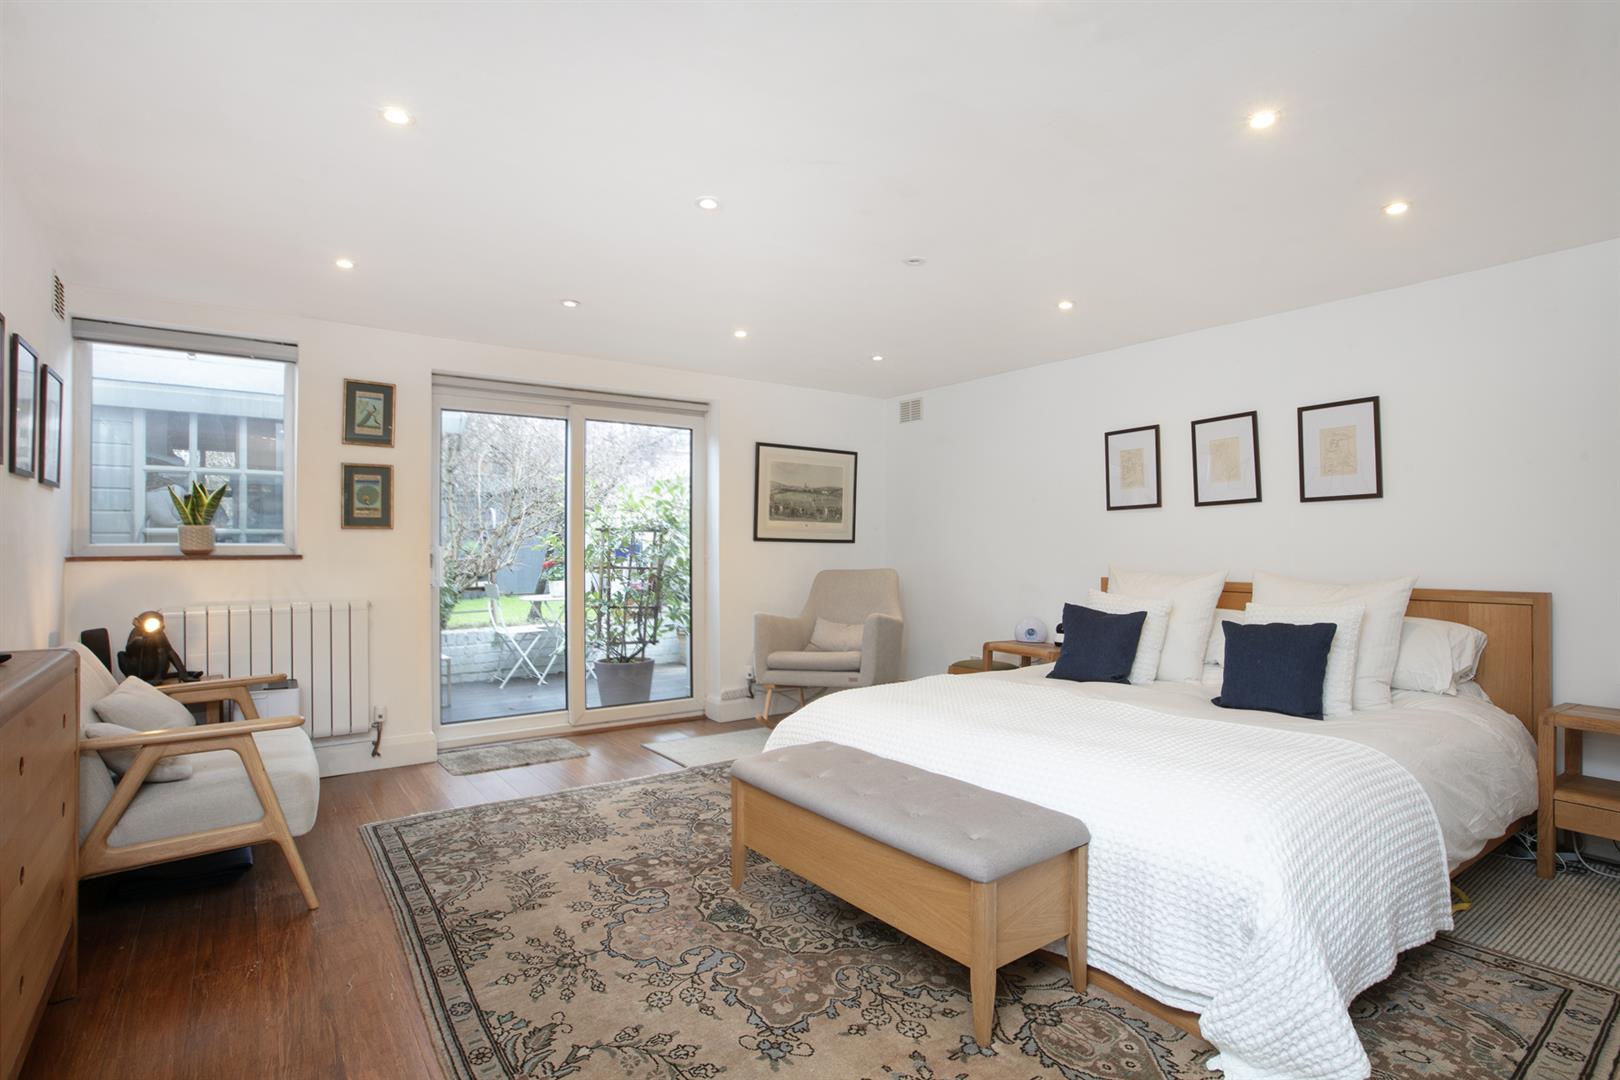 Flat - Conversion For Sale in Consort Road, Nunhead, SE15 1183 view14